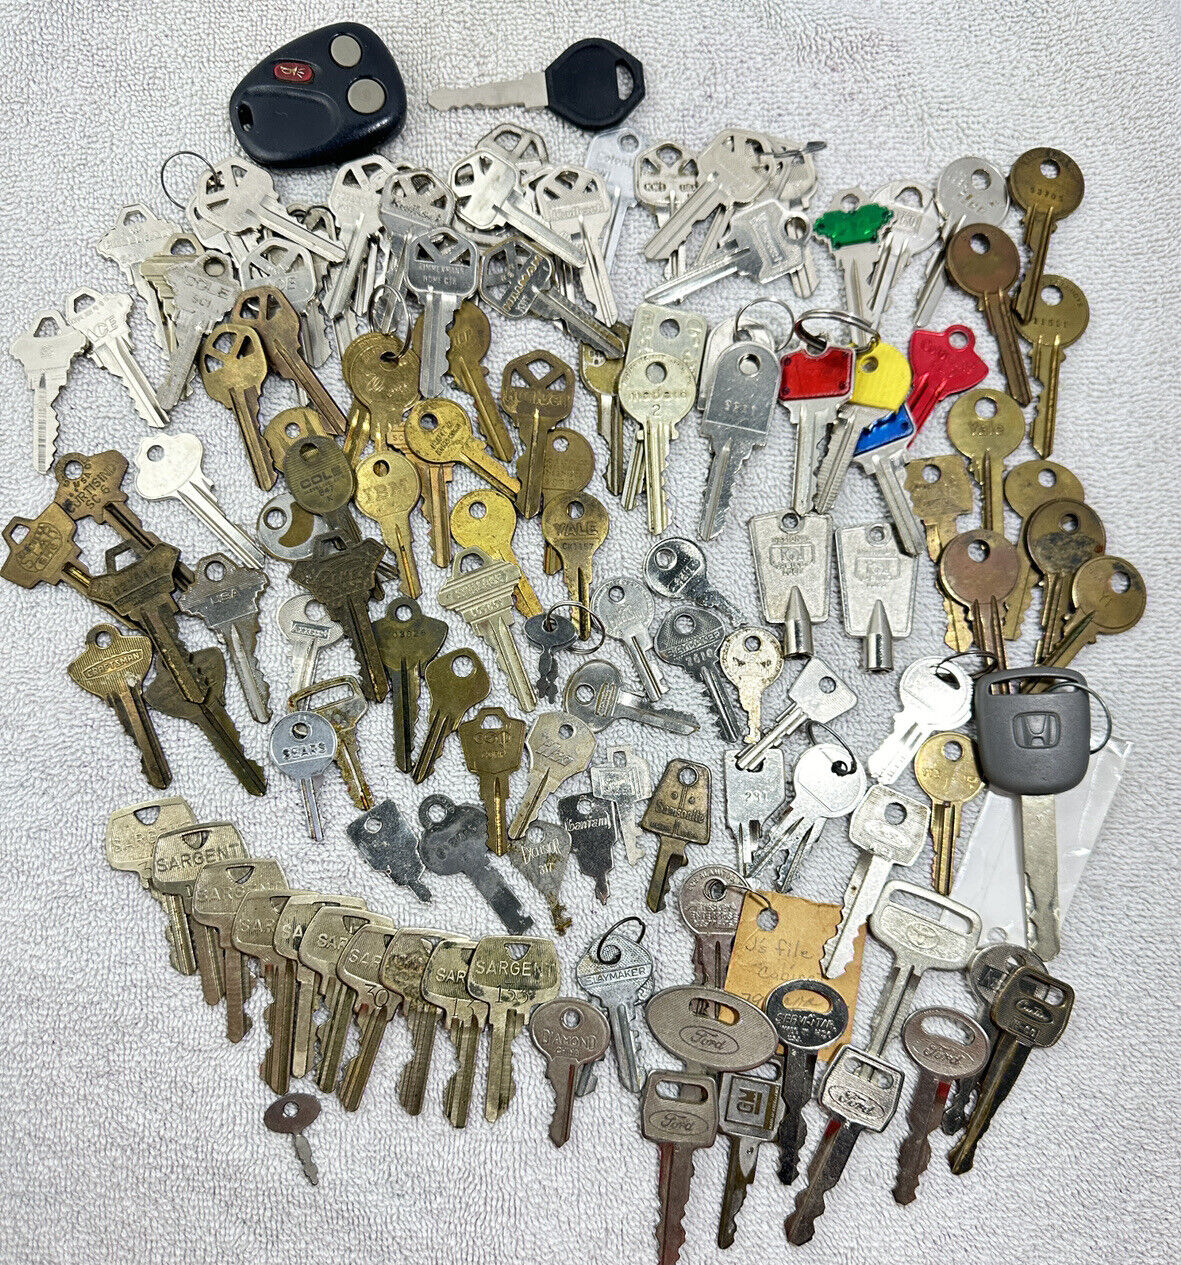 Lot Of Misc Used Cut Keys Over 2 Pounds Auto Home Business Pad Suit Case Cabinet